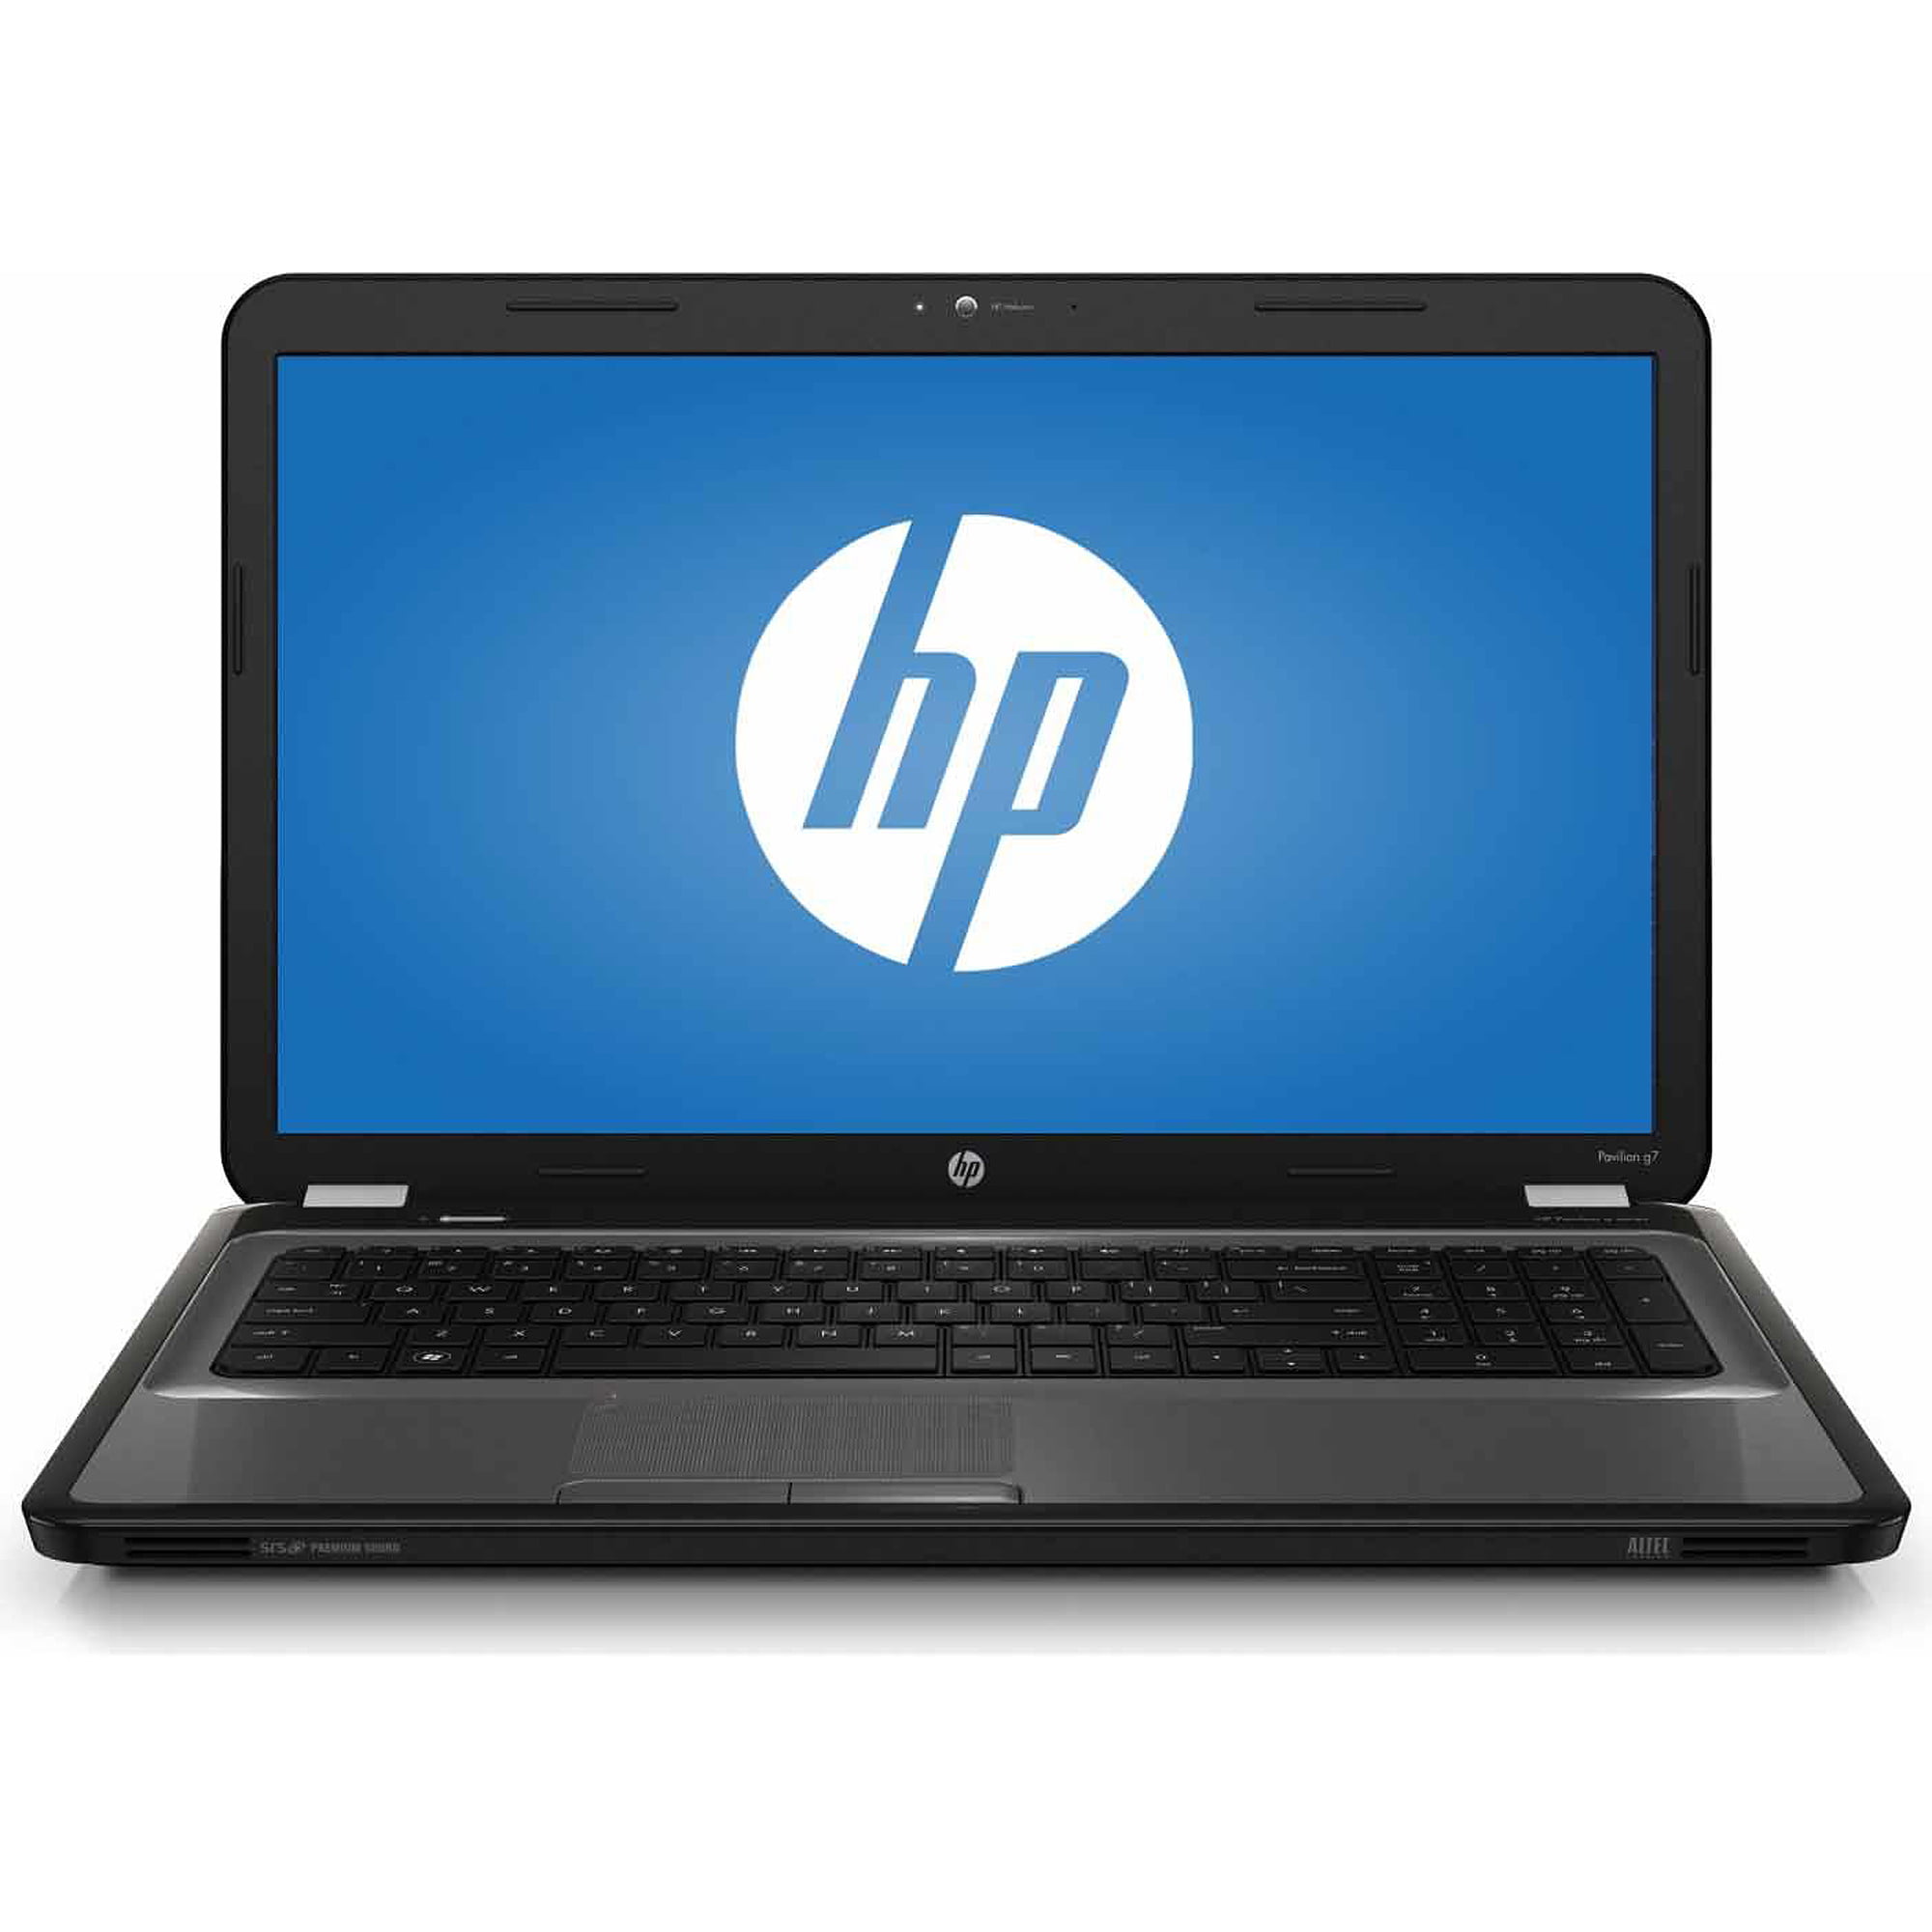 Restored HP Silver 17.3" Pavilion G7-2341dx Laptop PC with AMD Quad